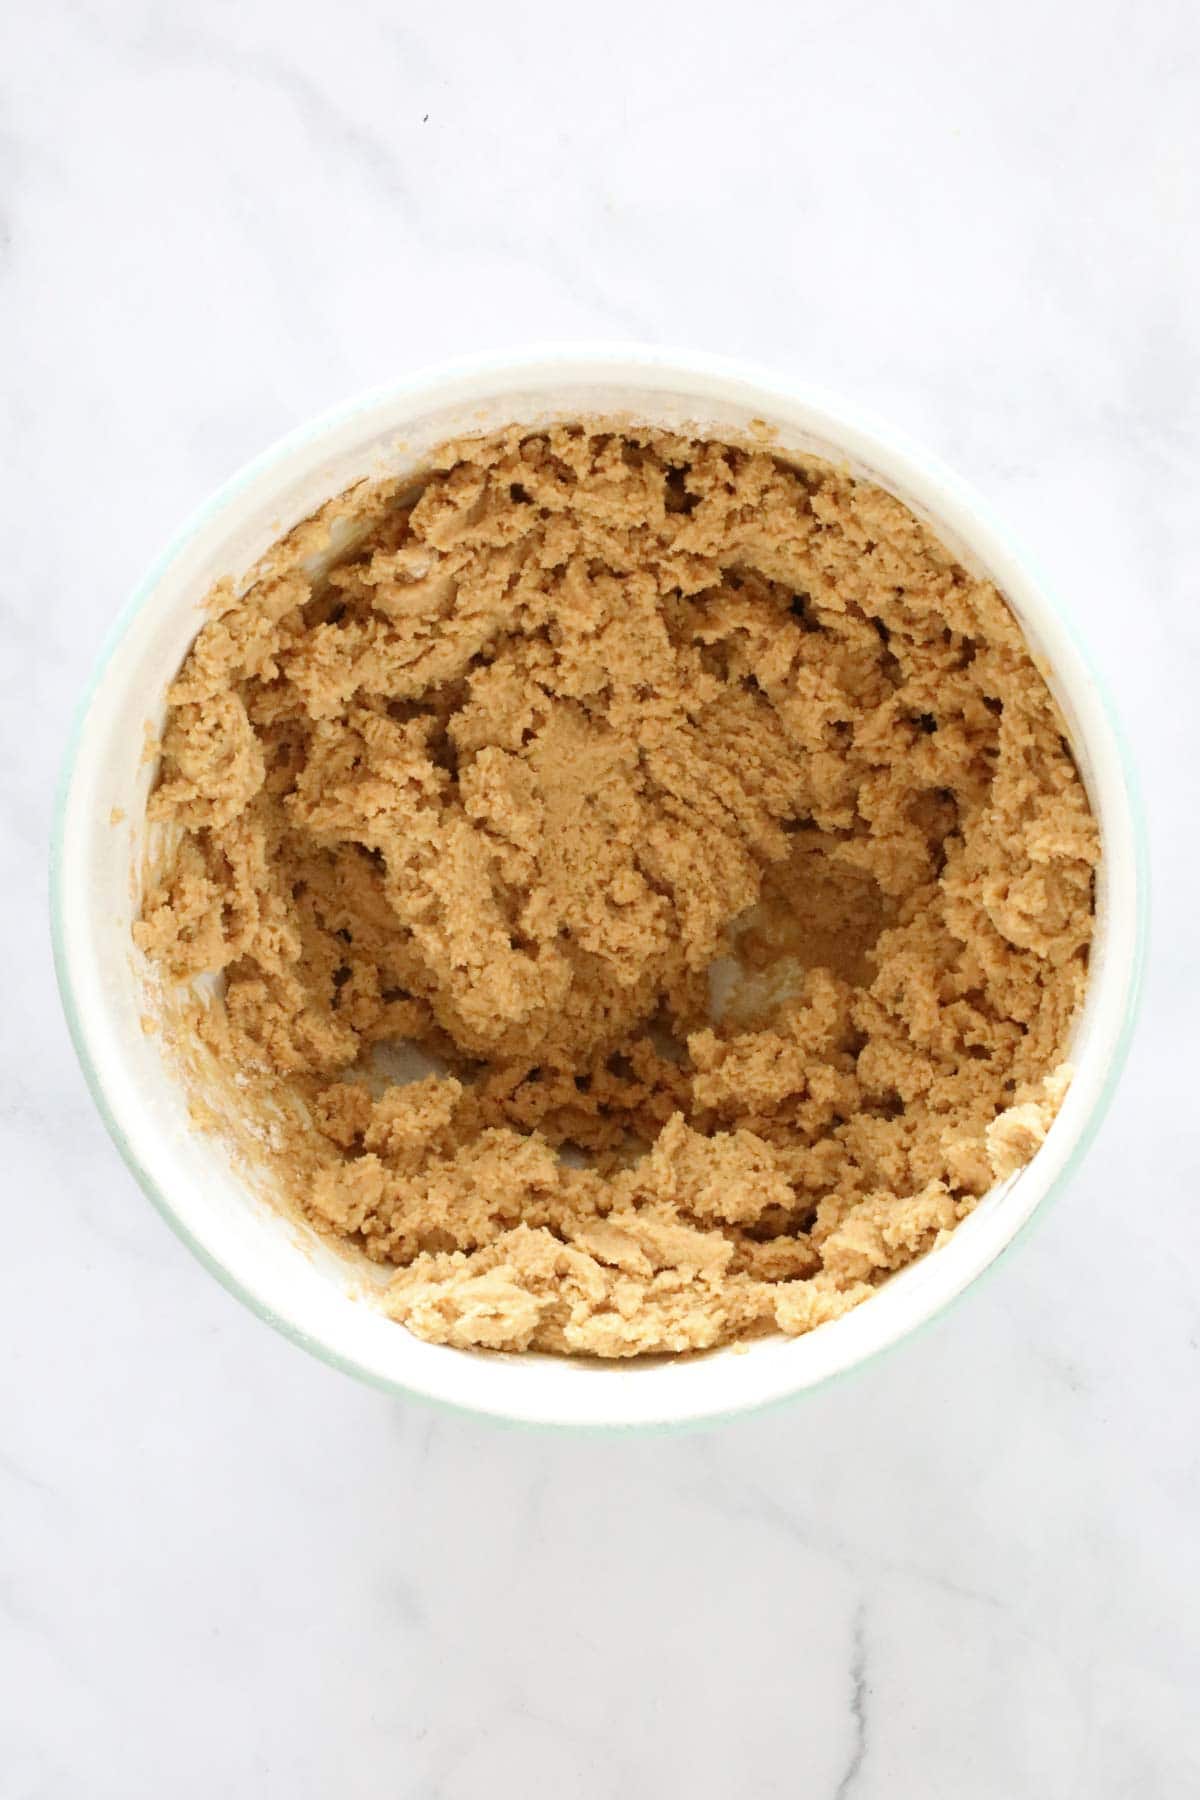 The combined peanut butter cookie dough mixture.